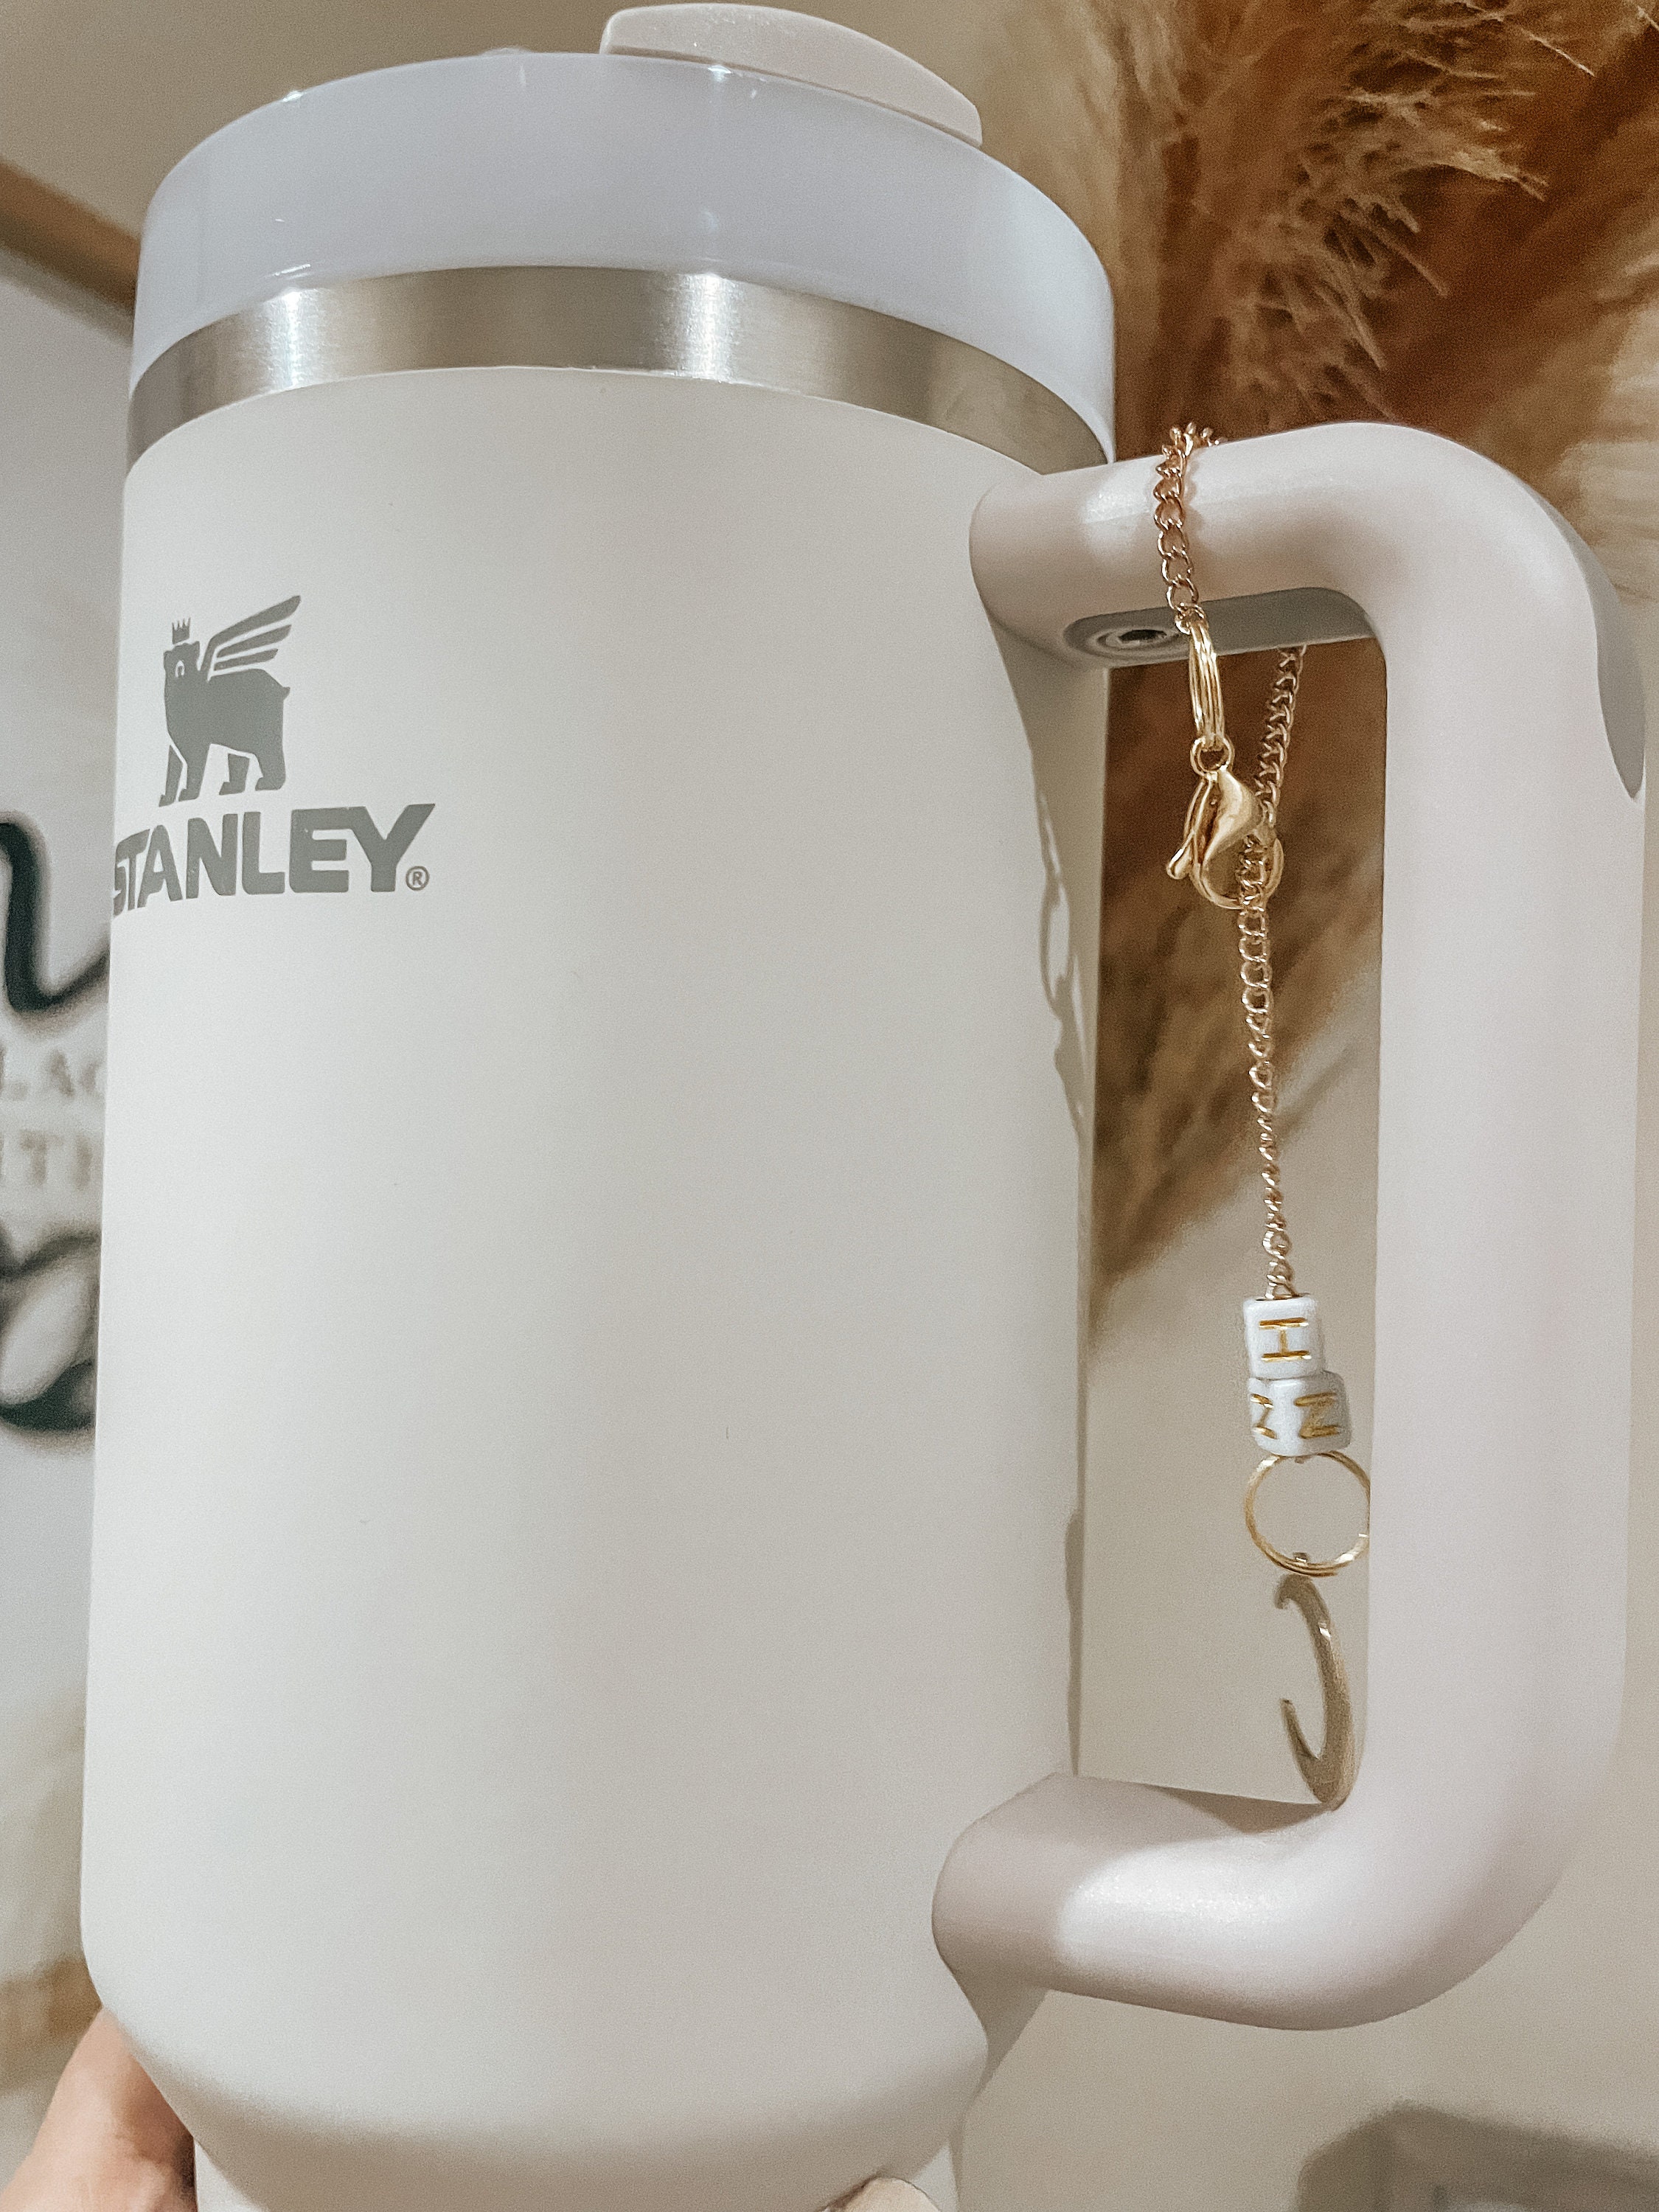 Stanley Tumbler Charm Stanley Cup Charm Water Bottle Charm Tumbler